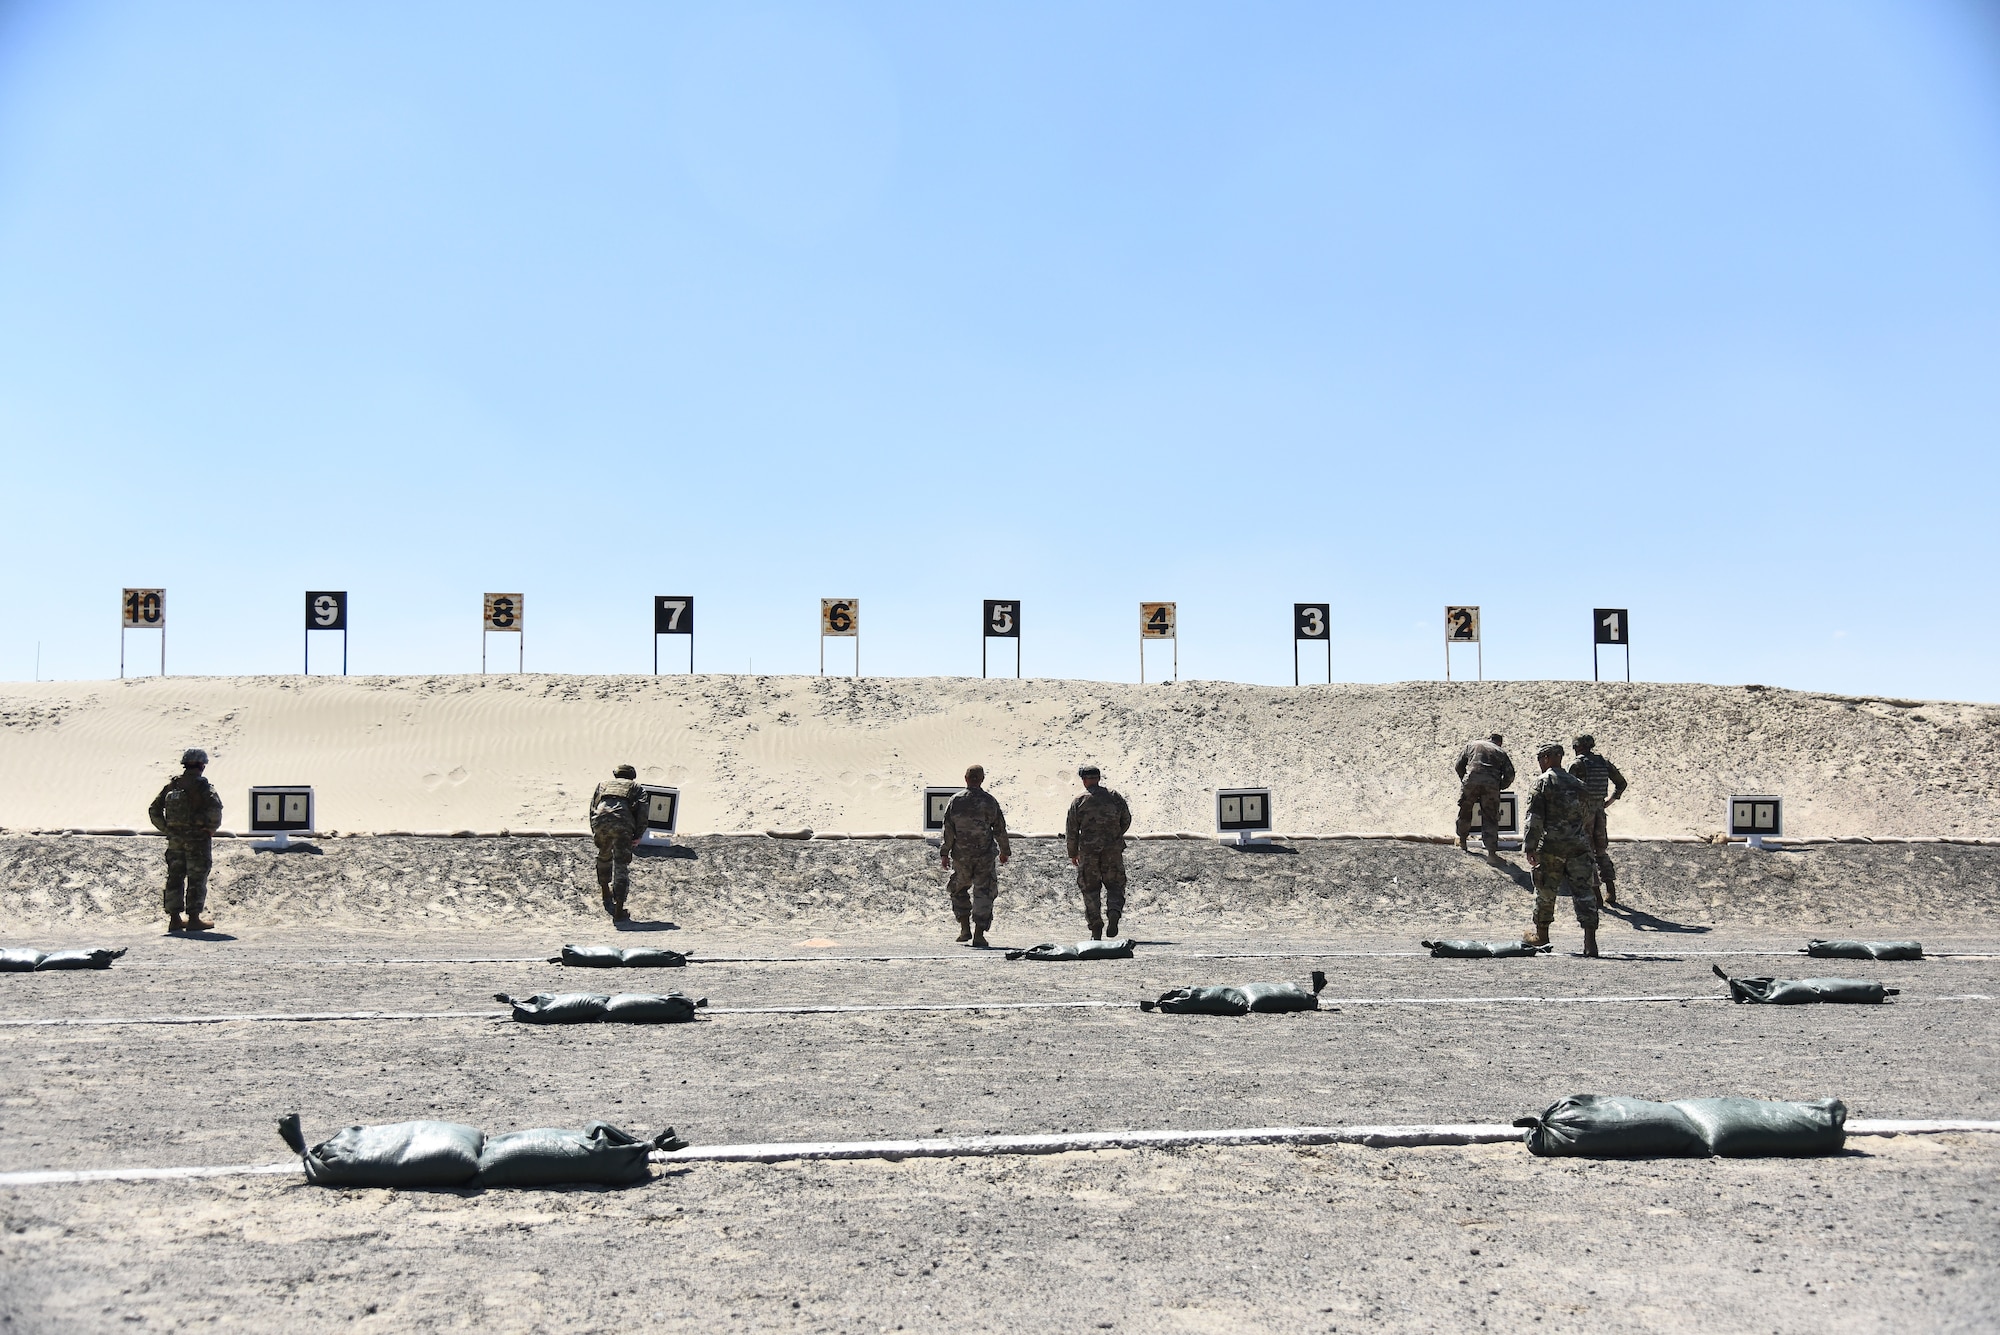 Airmen assigned to the 380th Expeditionary Security Forces Squadron prepare to correct their sights at Al Dhafra Air Base, United Arab Emirates, March 8, 2019. Security Forces Airmen are also known as Defenders. (U.S. Air Force photo by Senior Airman Mya M. Crosby)